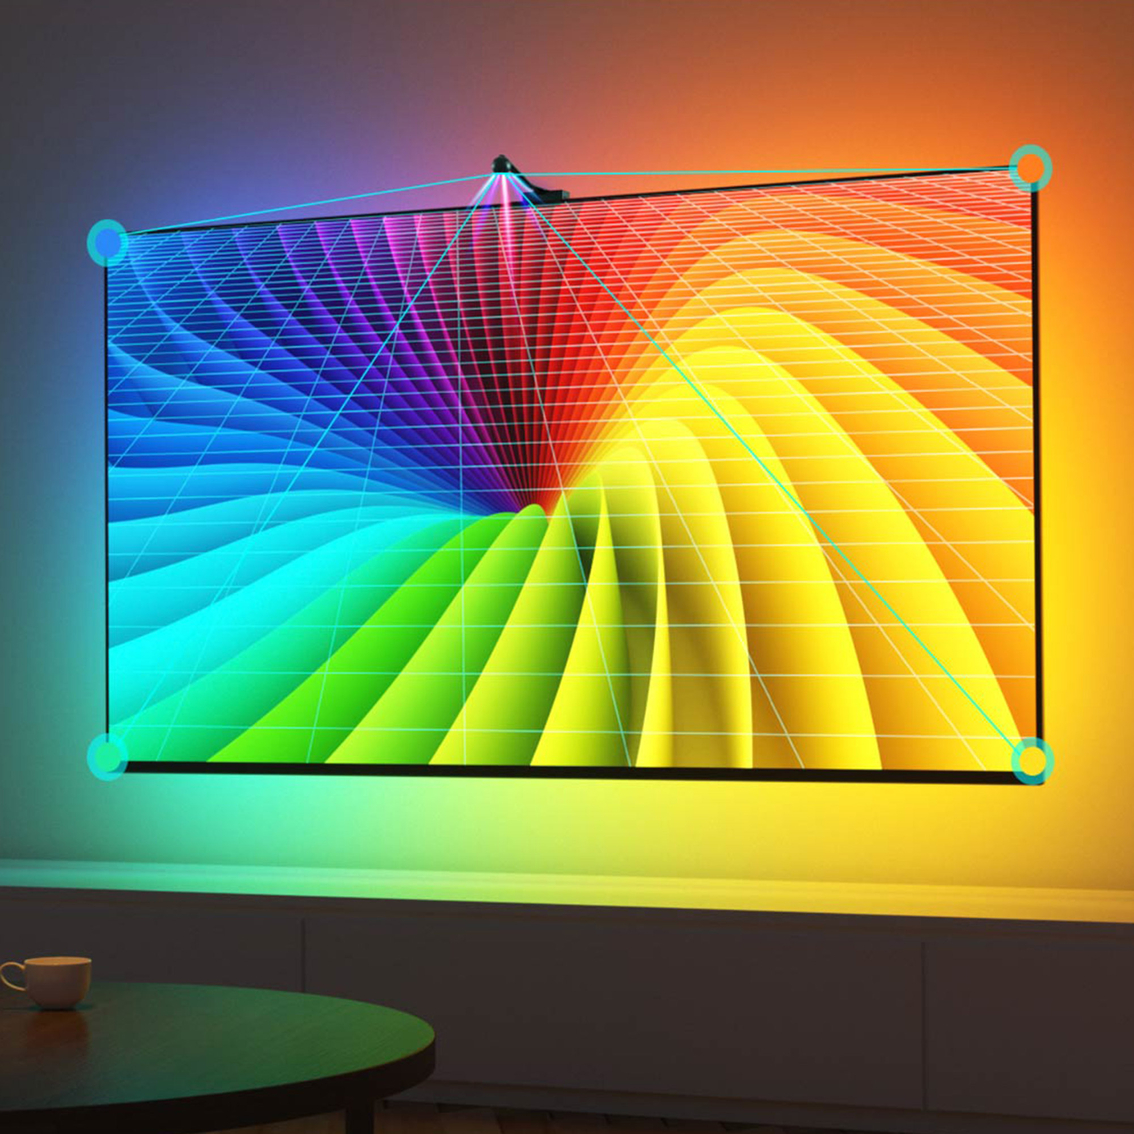 Govee DreamView T1 TV Backlight - Image 4 of 9